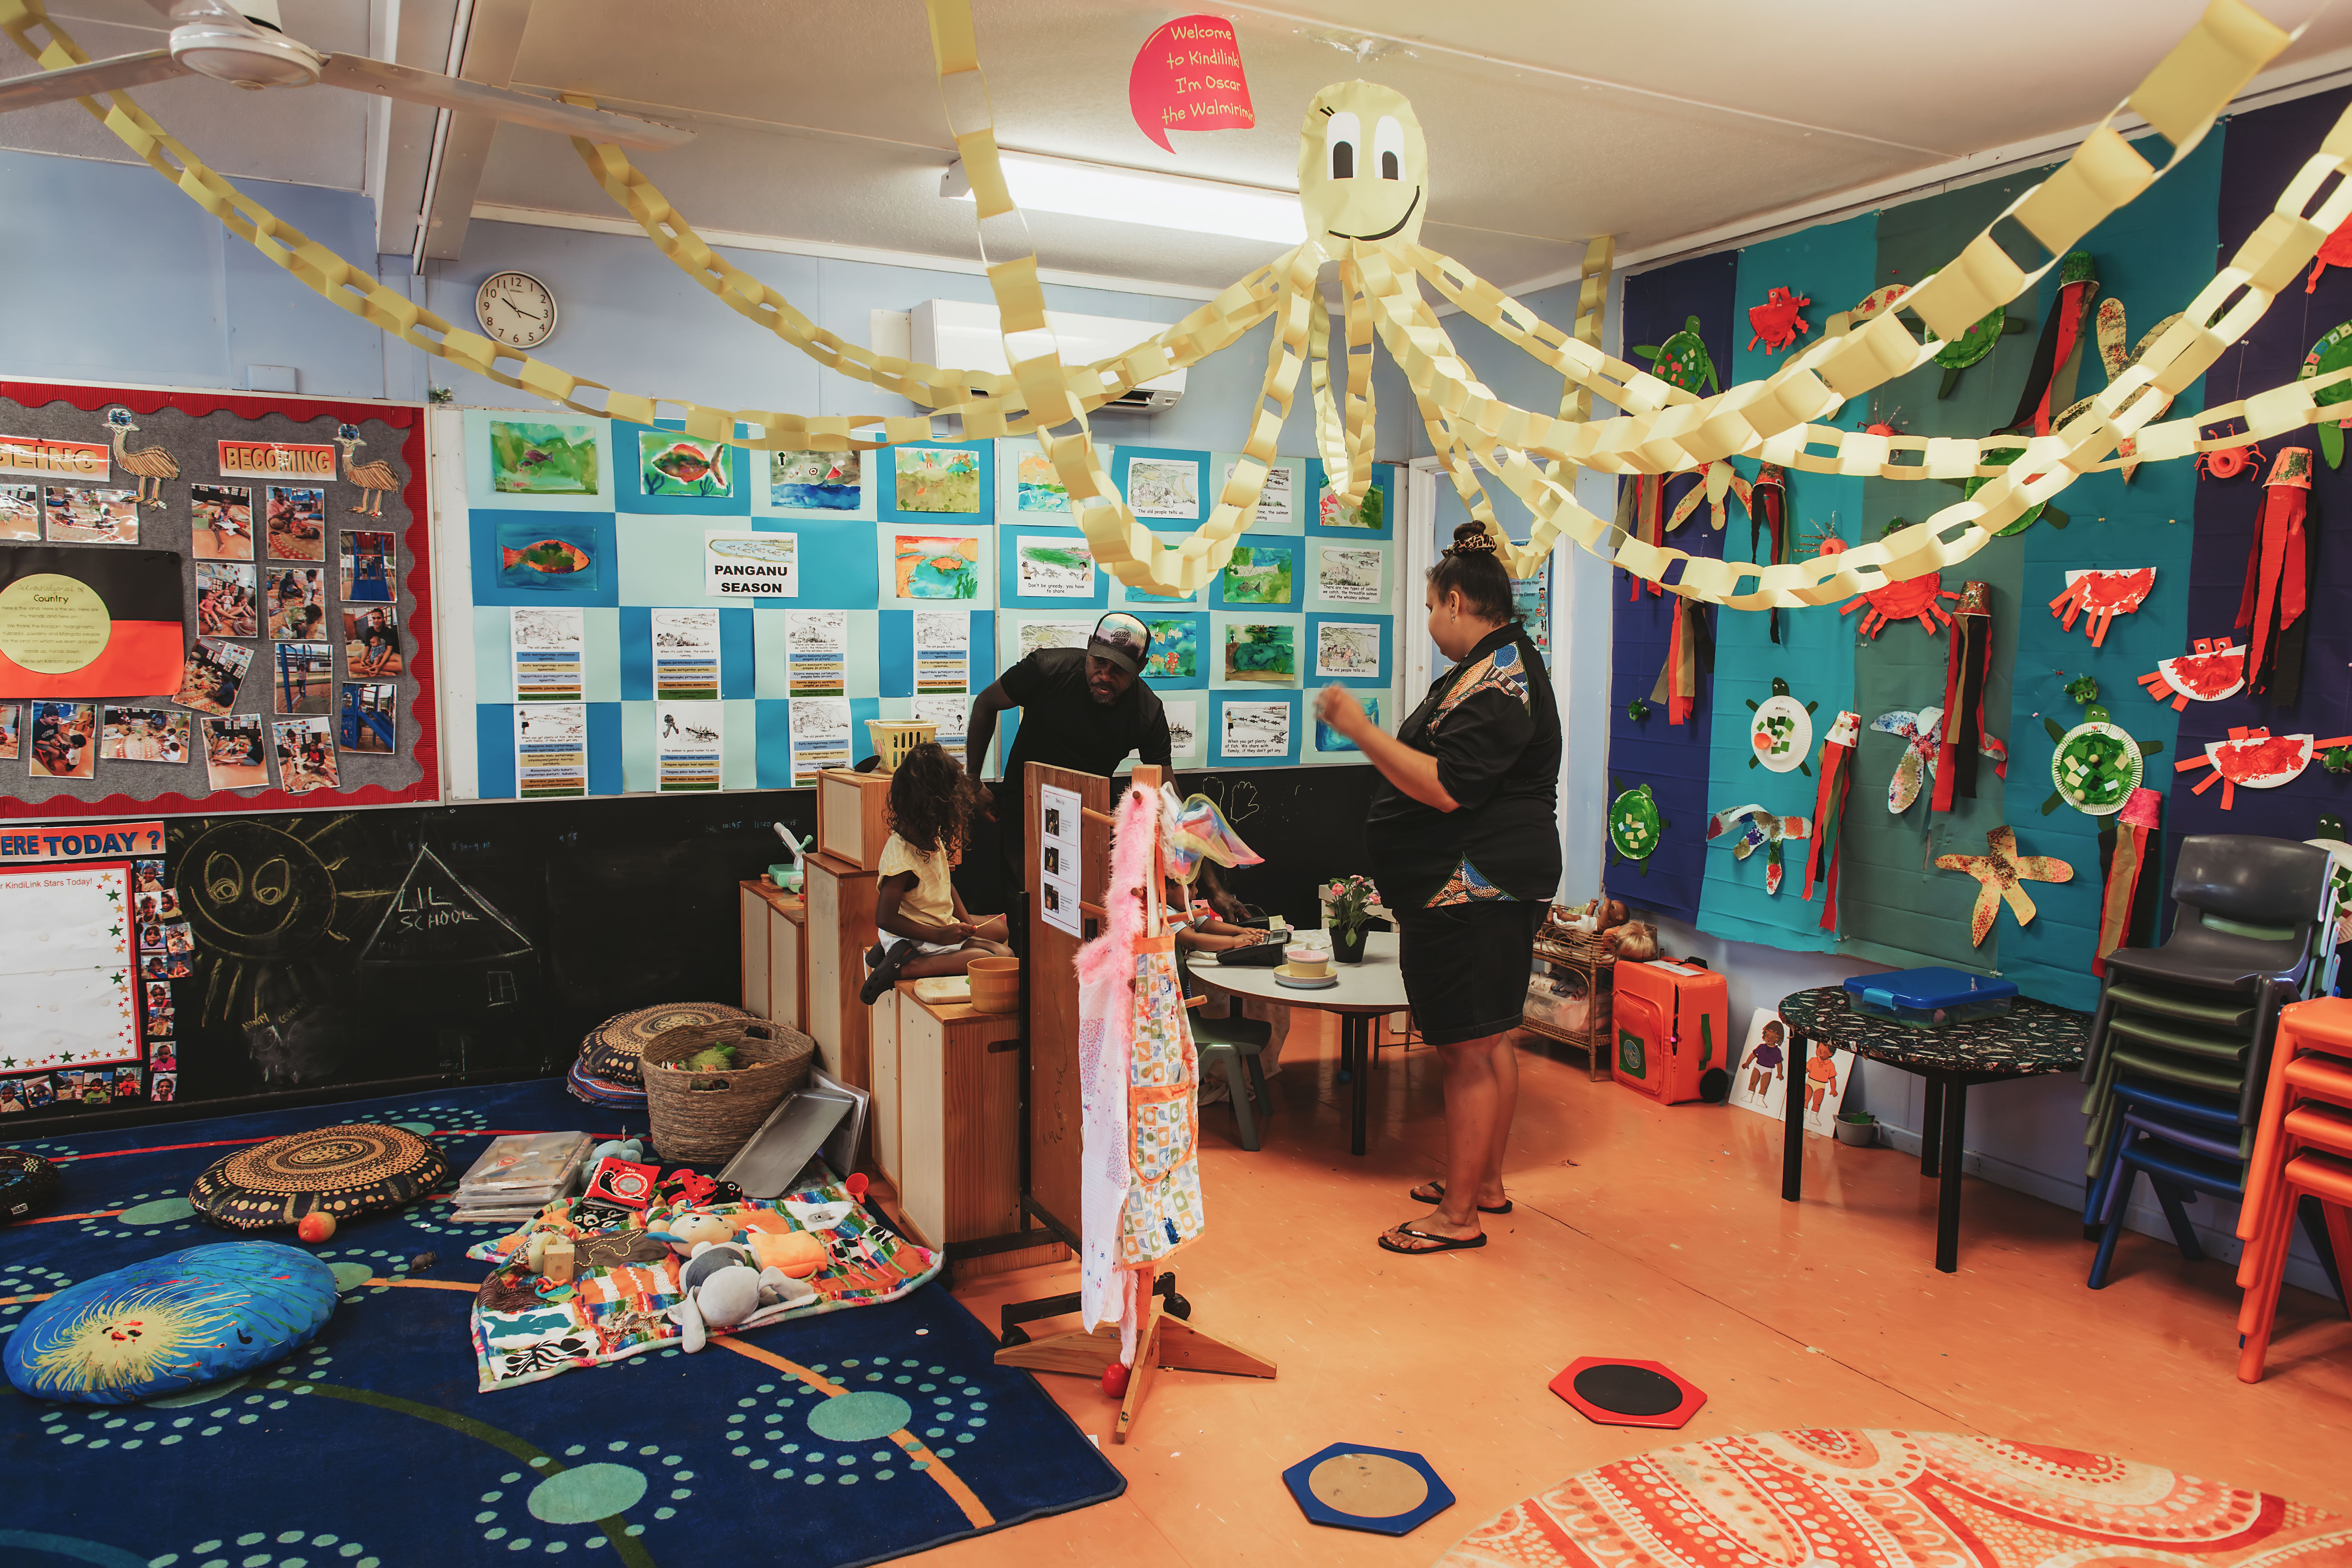 Children and carers in the classroom decorated with a large paper octopus hanging from the ceiling